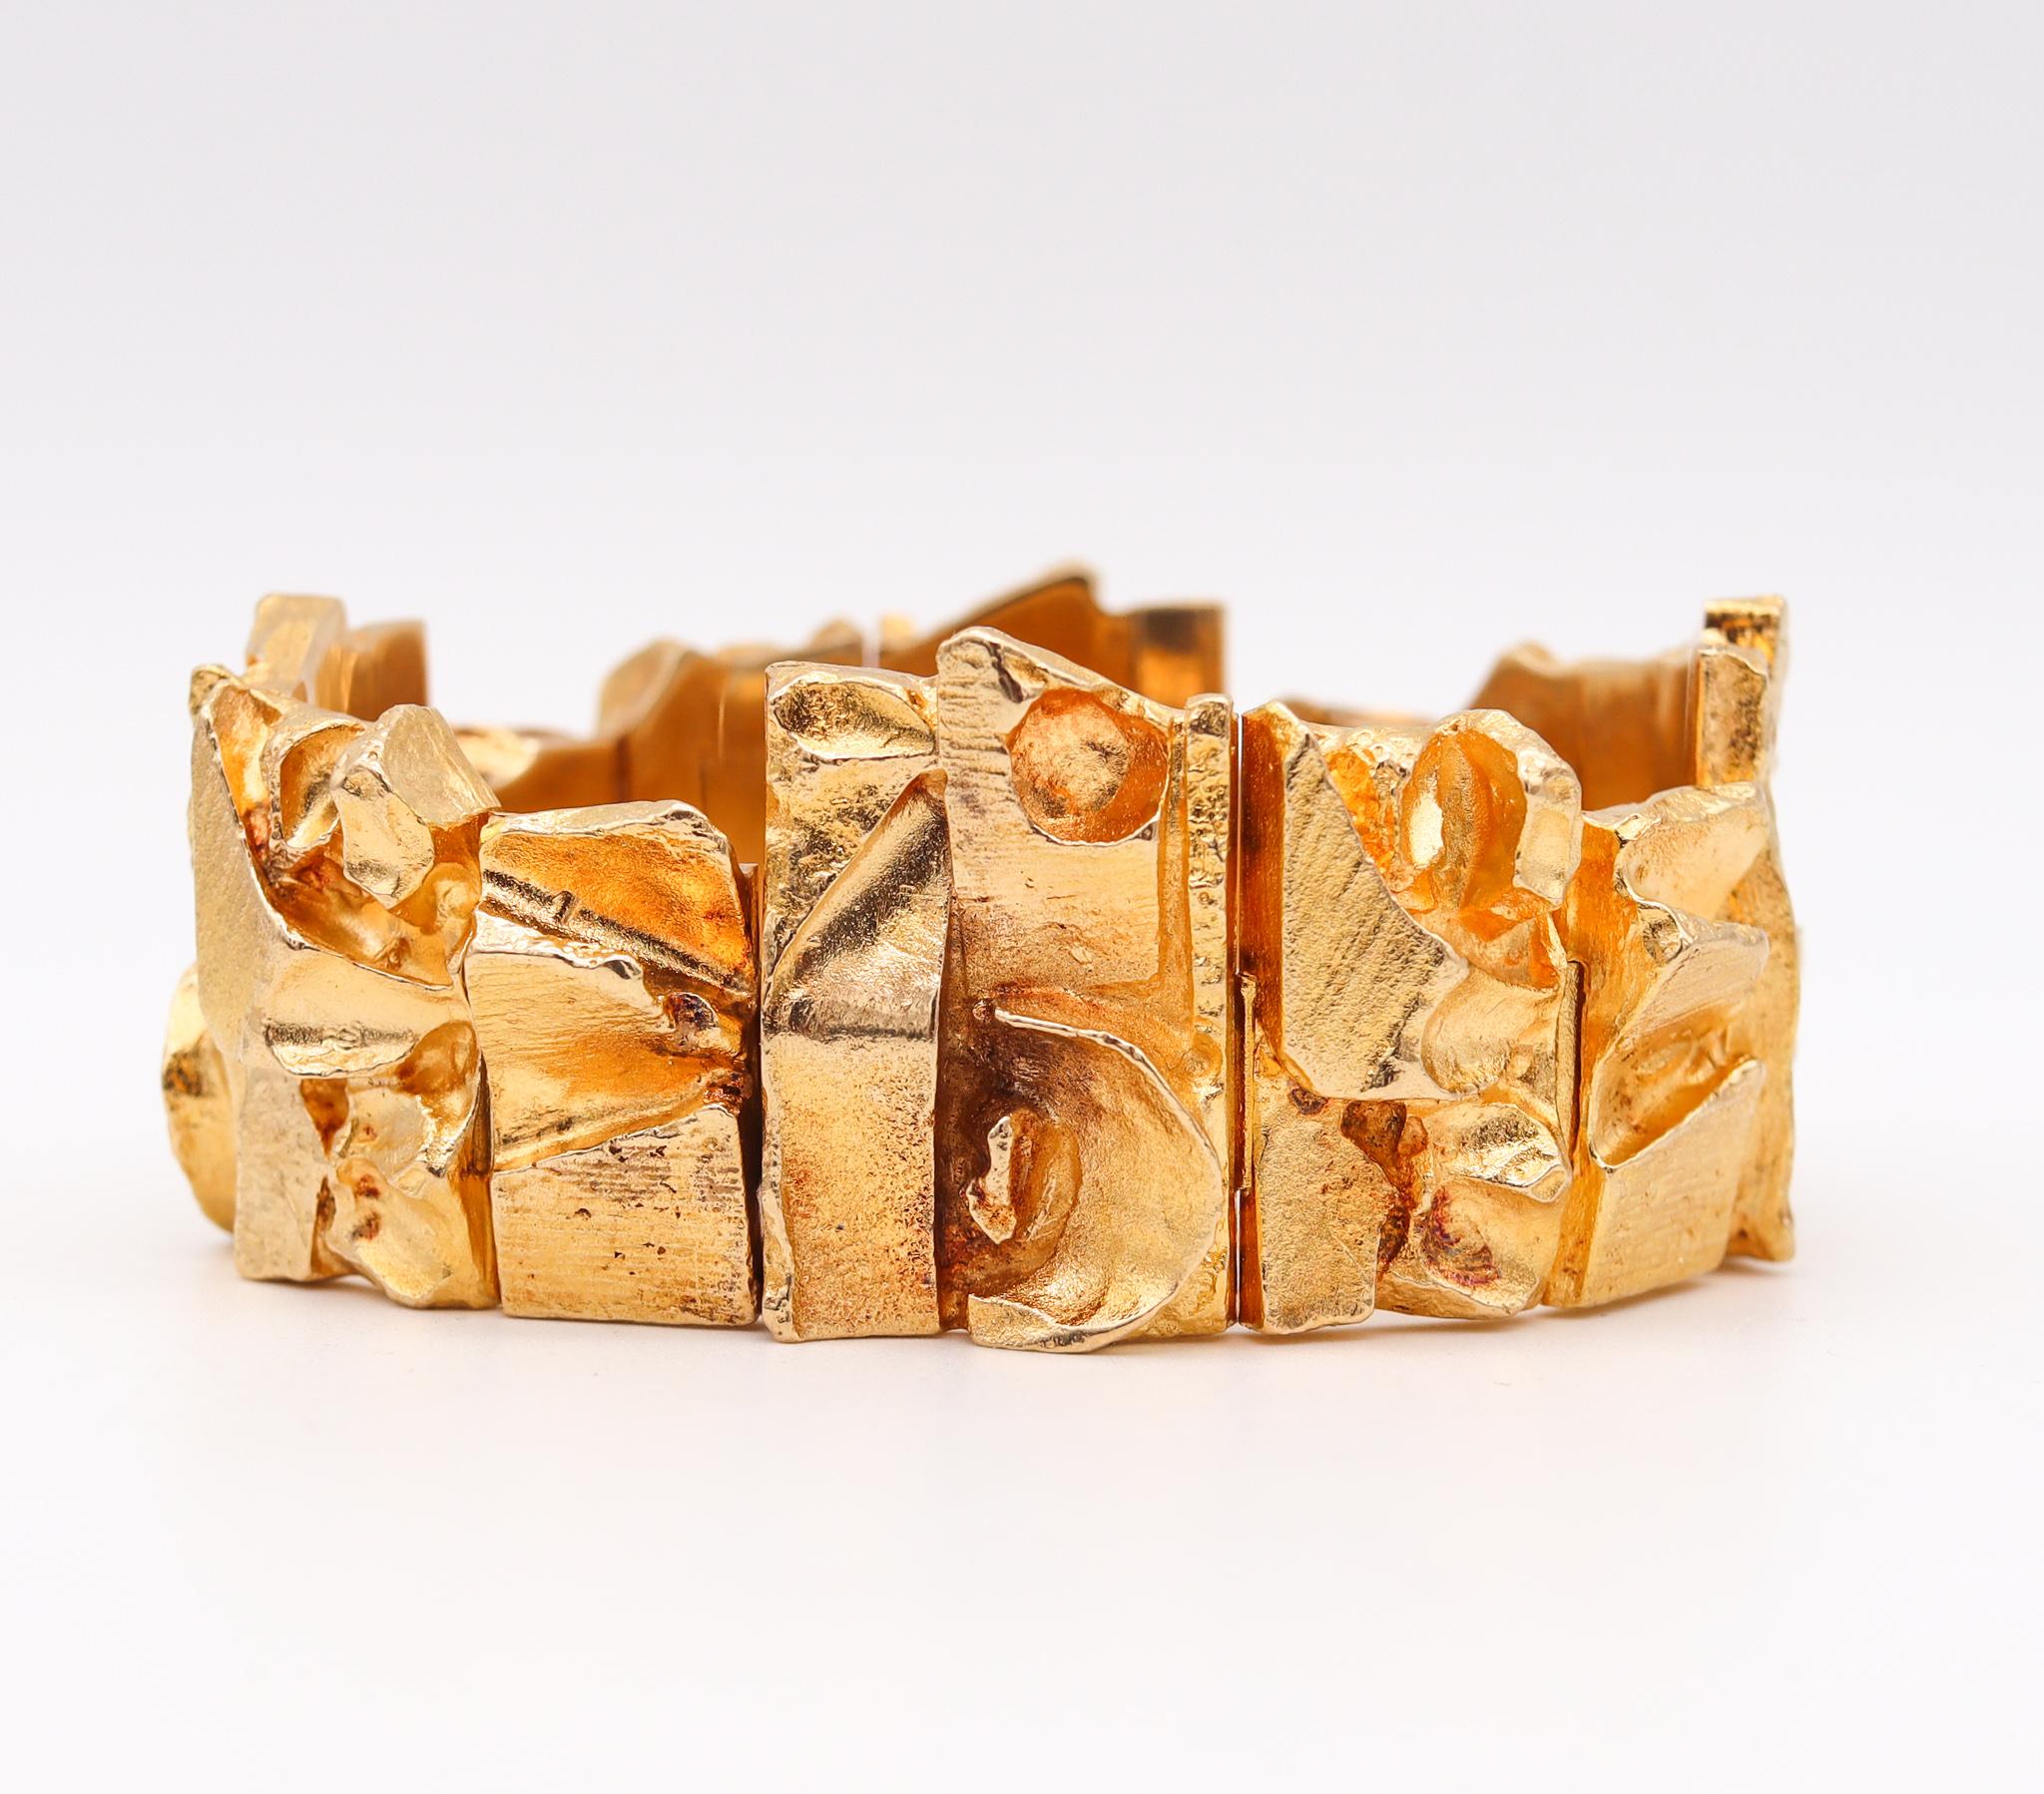 Tenochtitlan bracelet designed by Enwurf Björn Weckström. (1935-)

Very rare unique piece of brutalism art, created in Helsinki Finland by the sculptor and goldsmith Björn Weckström, back in the 1971. This magnificent bold and massive bracelet is